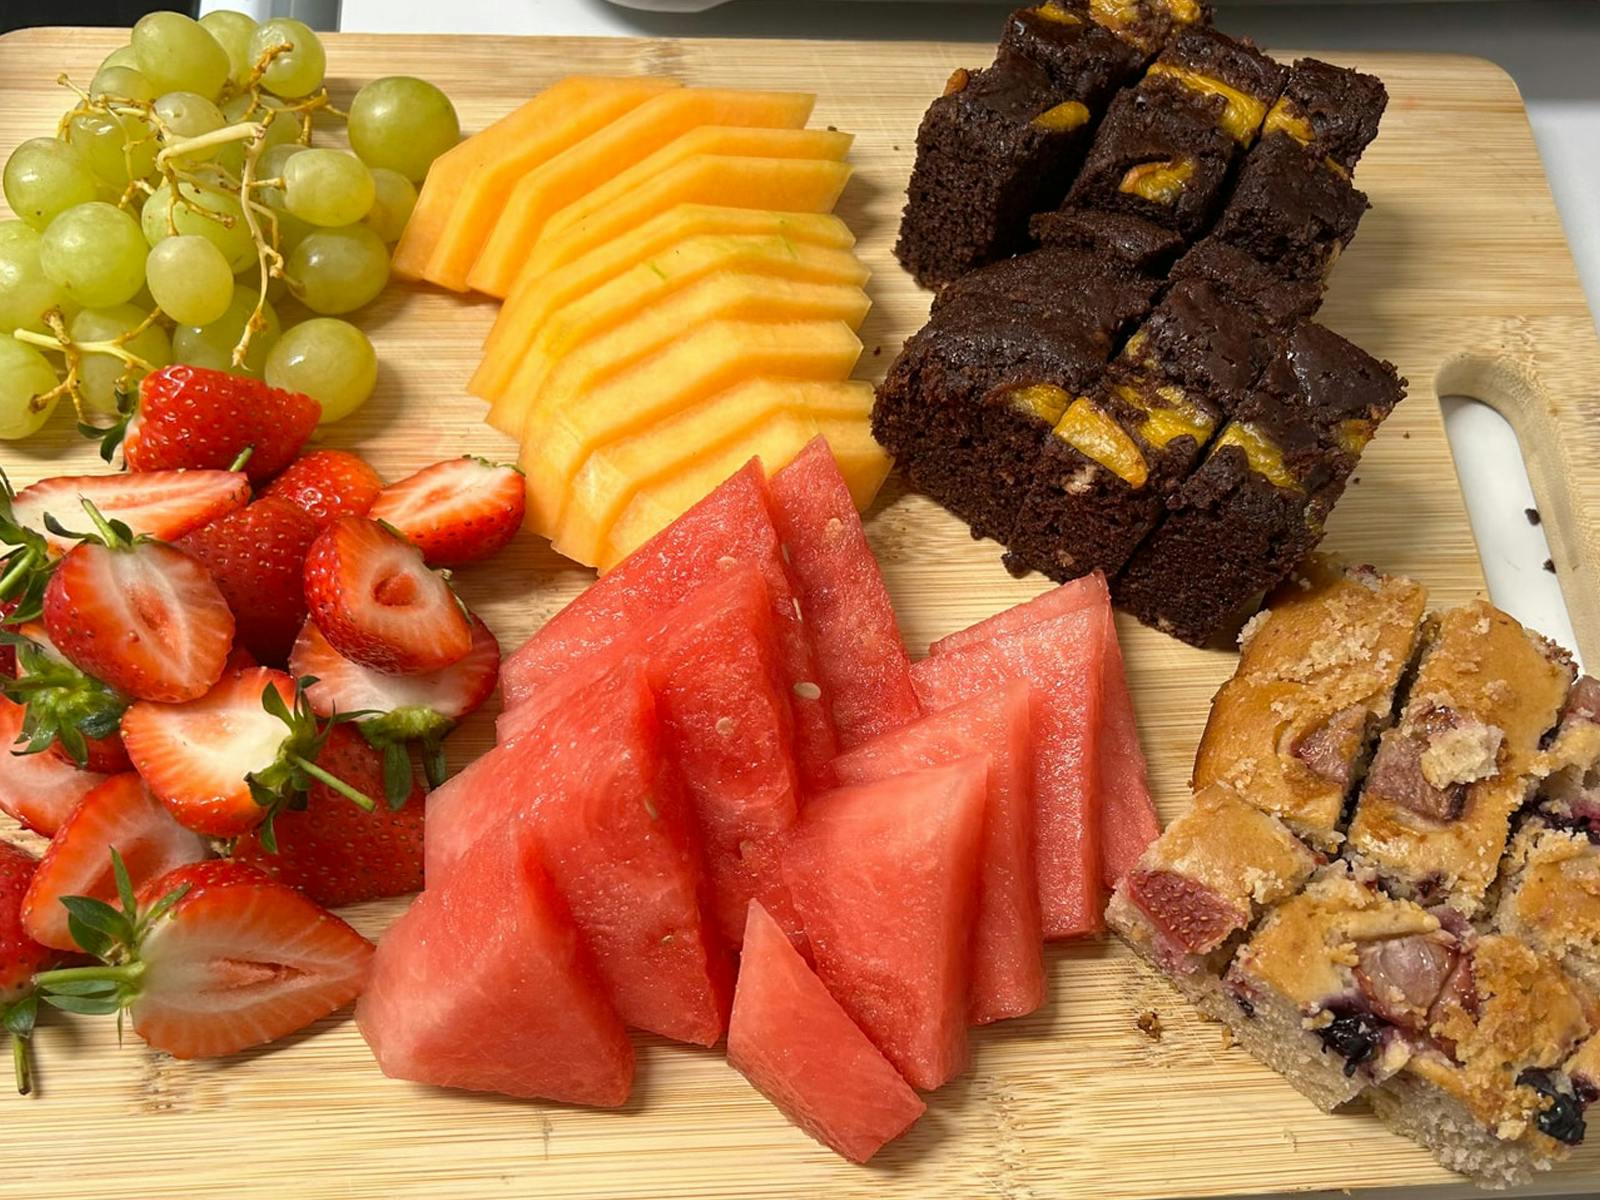 A platter of delicious freshly cut fruit.